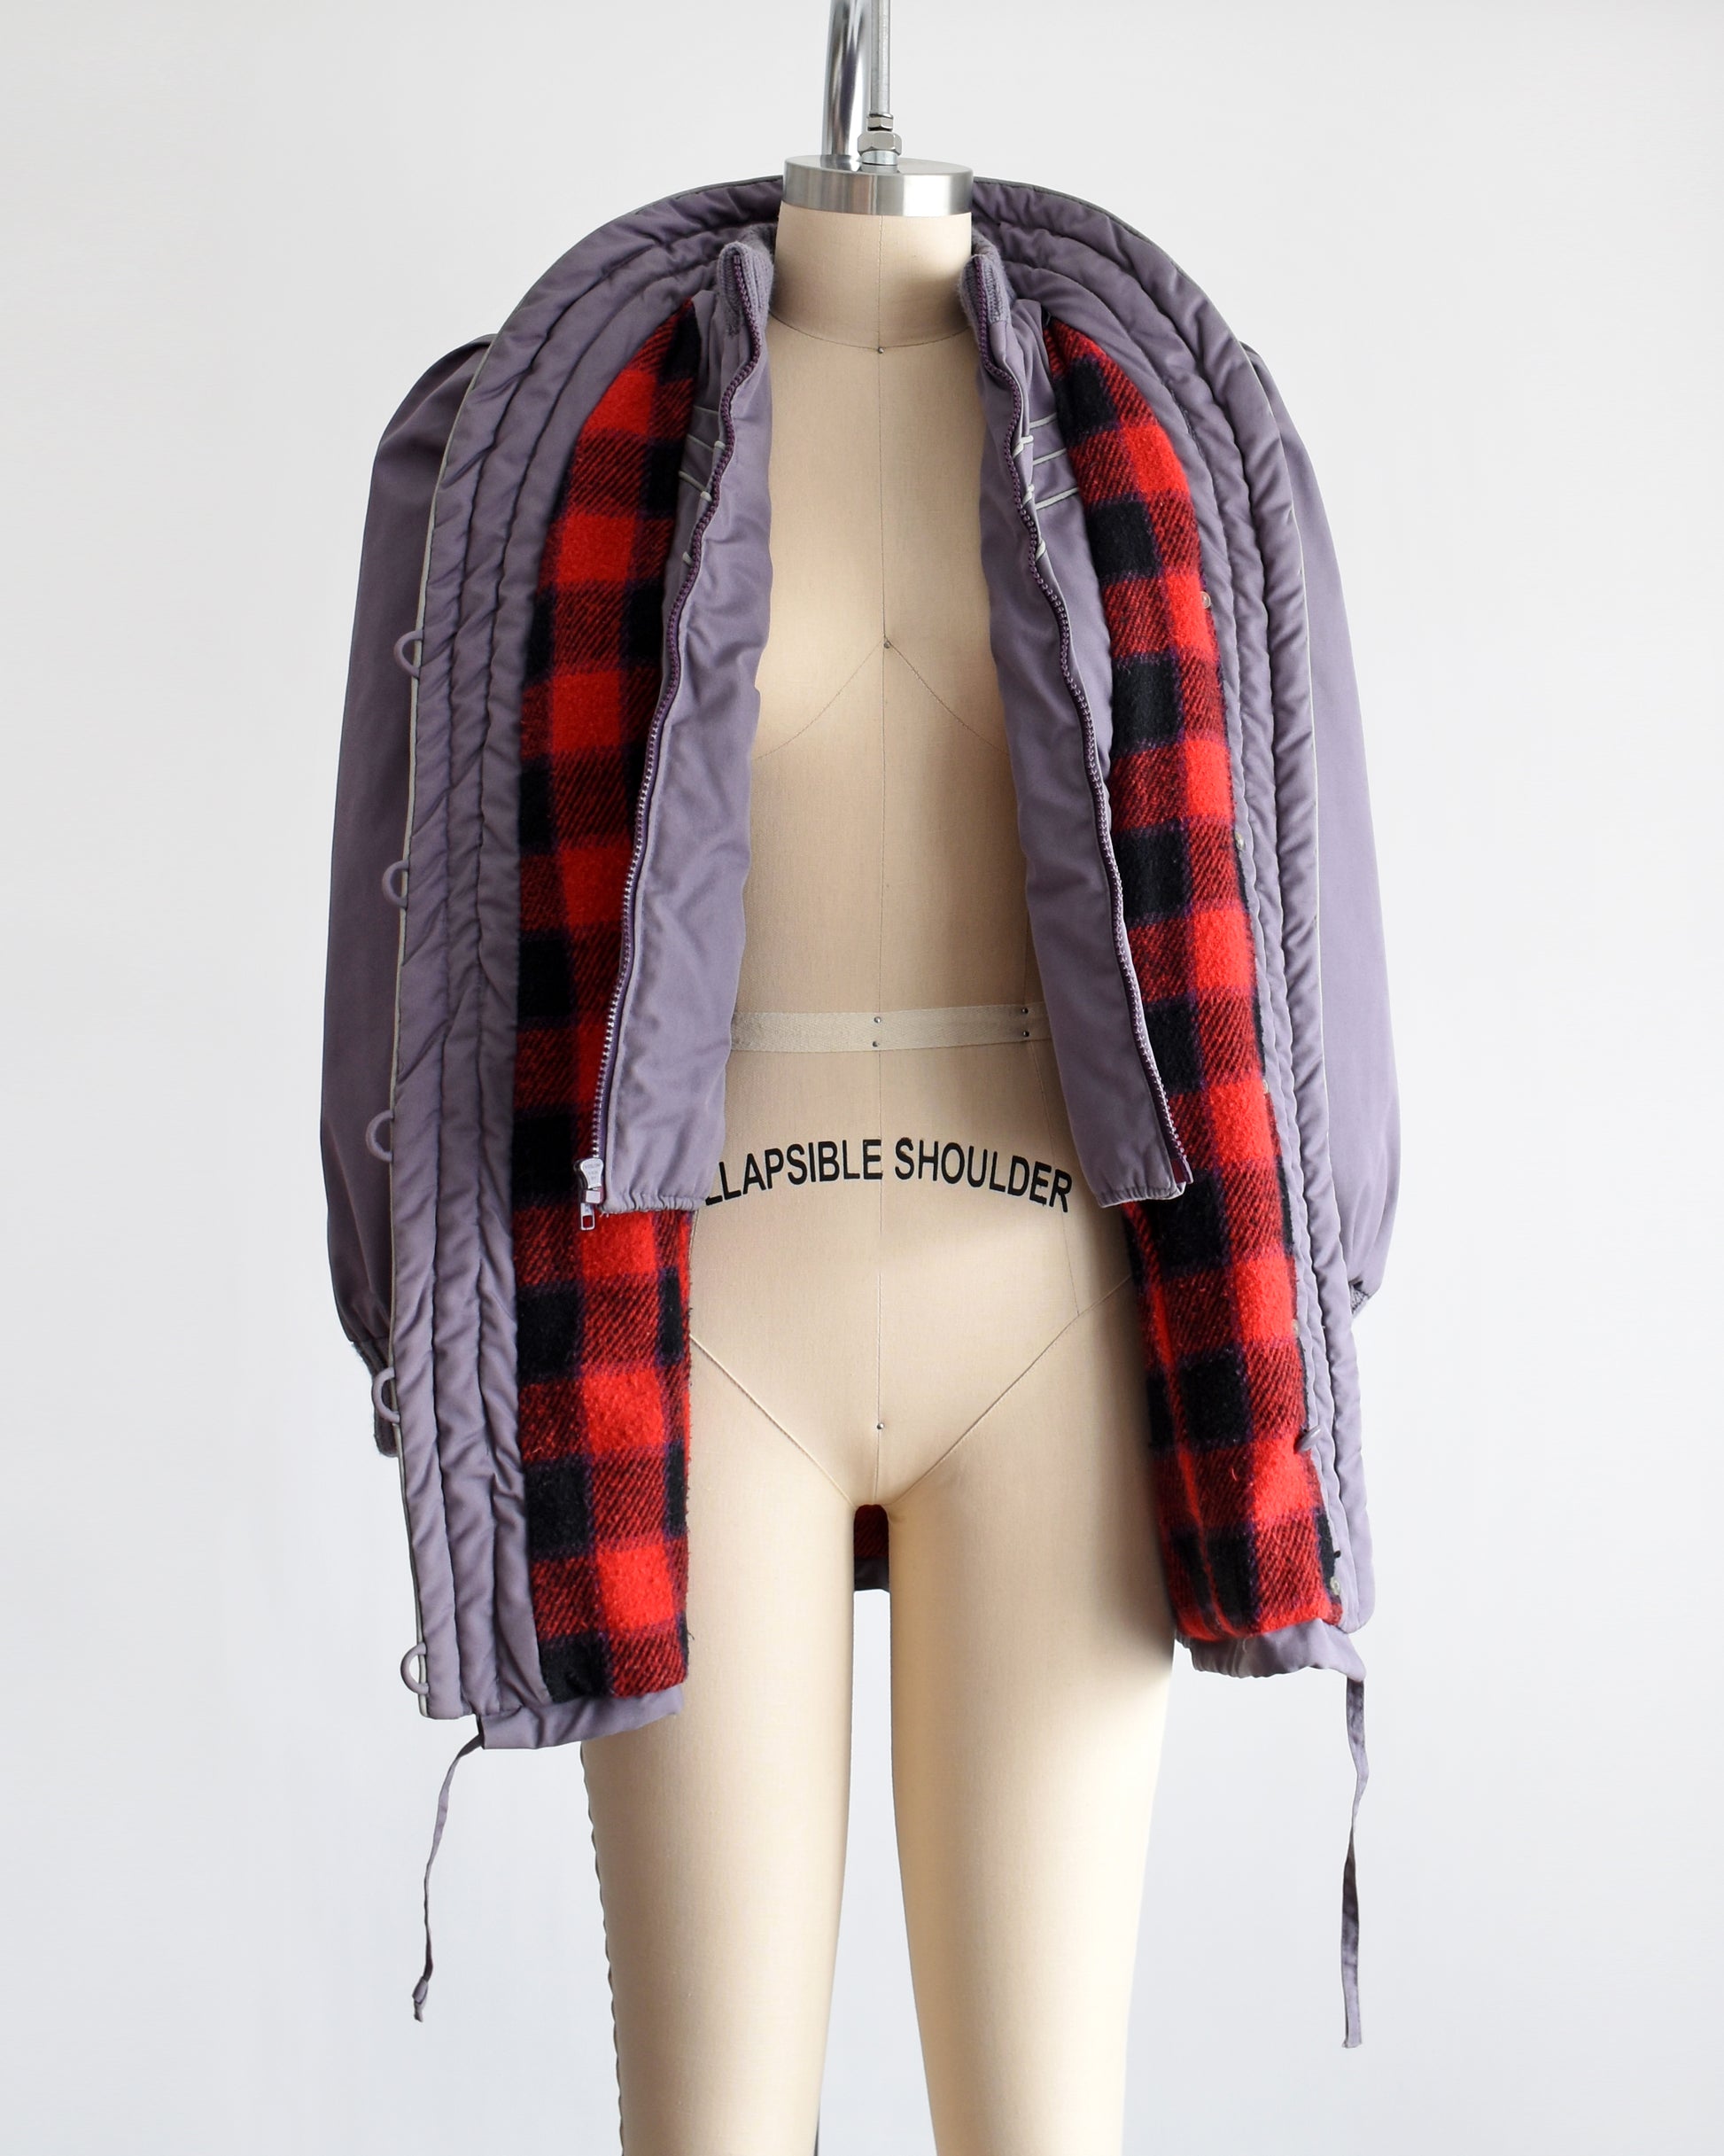  a vintage 1980s purple puffy coat with shawl style collar with gray trim. The coat is unbuttoned and unzipped showing the plaid lining